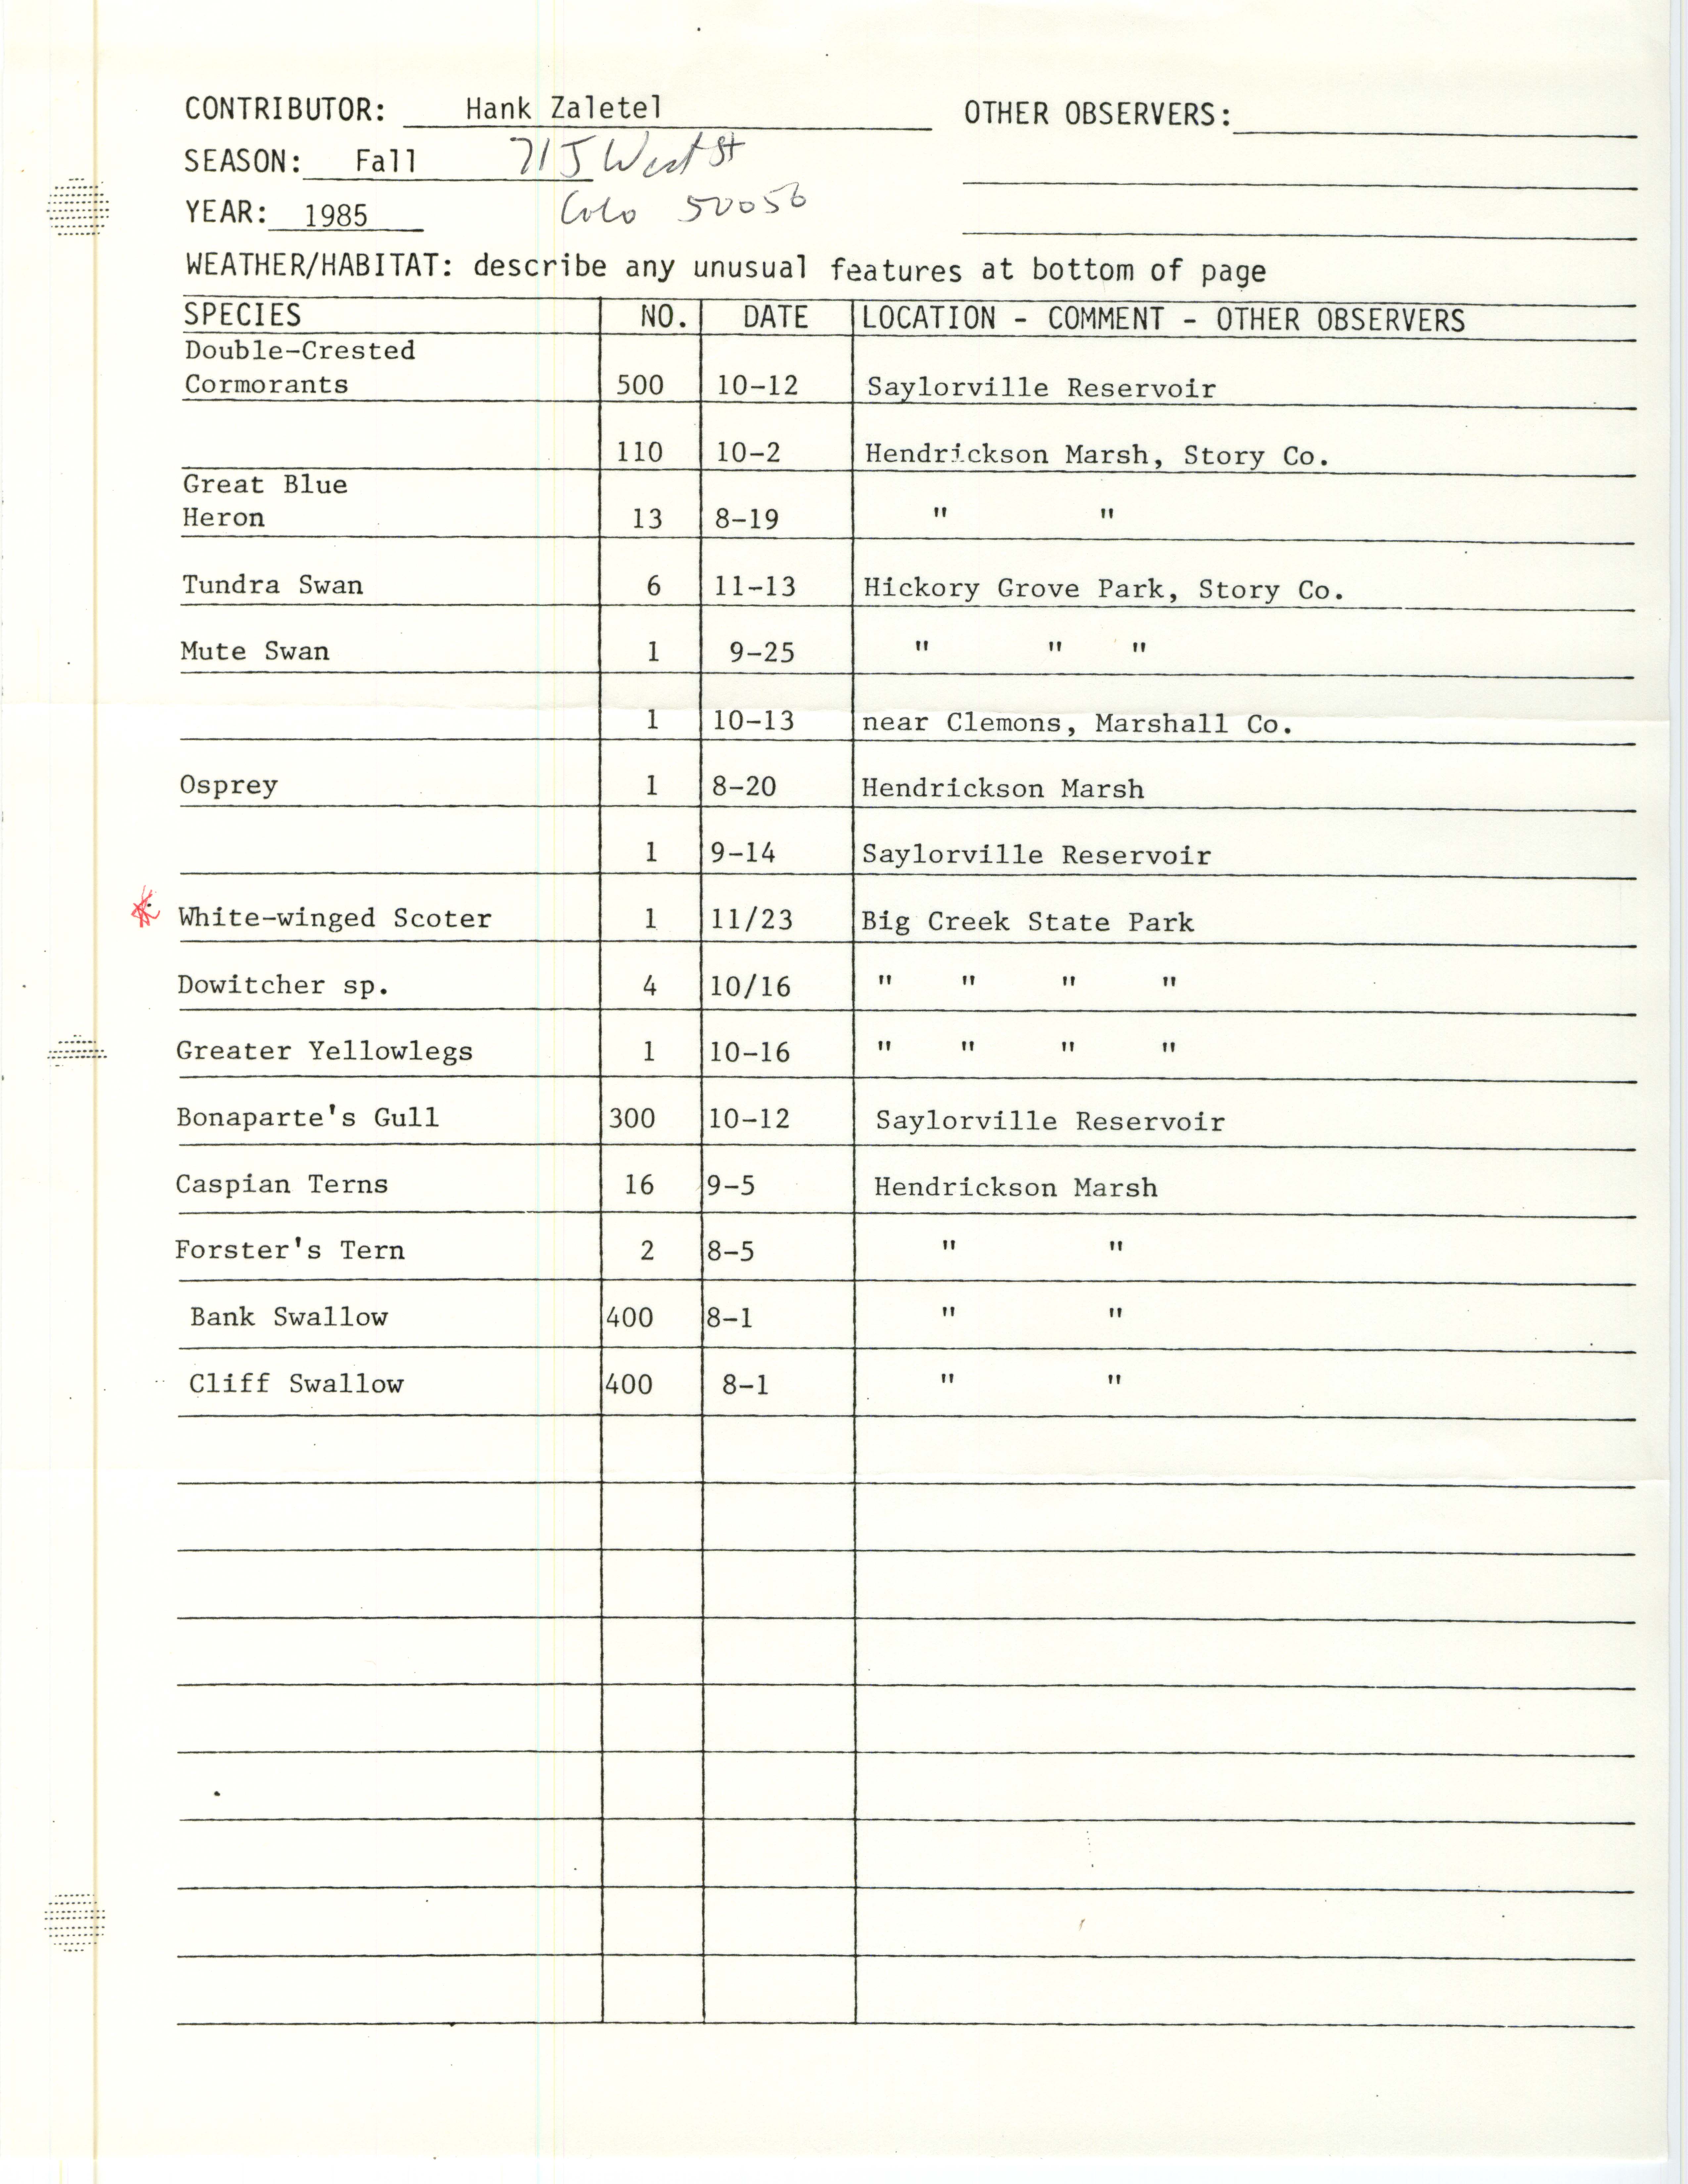 Annotated bird sighting list for Fall 1985 compiled by Hank Zaletel